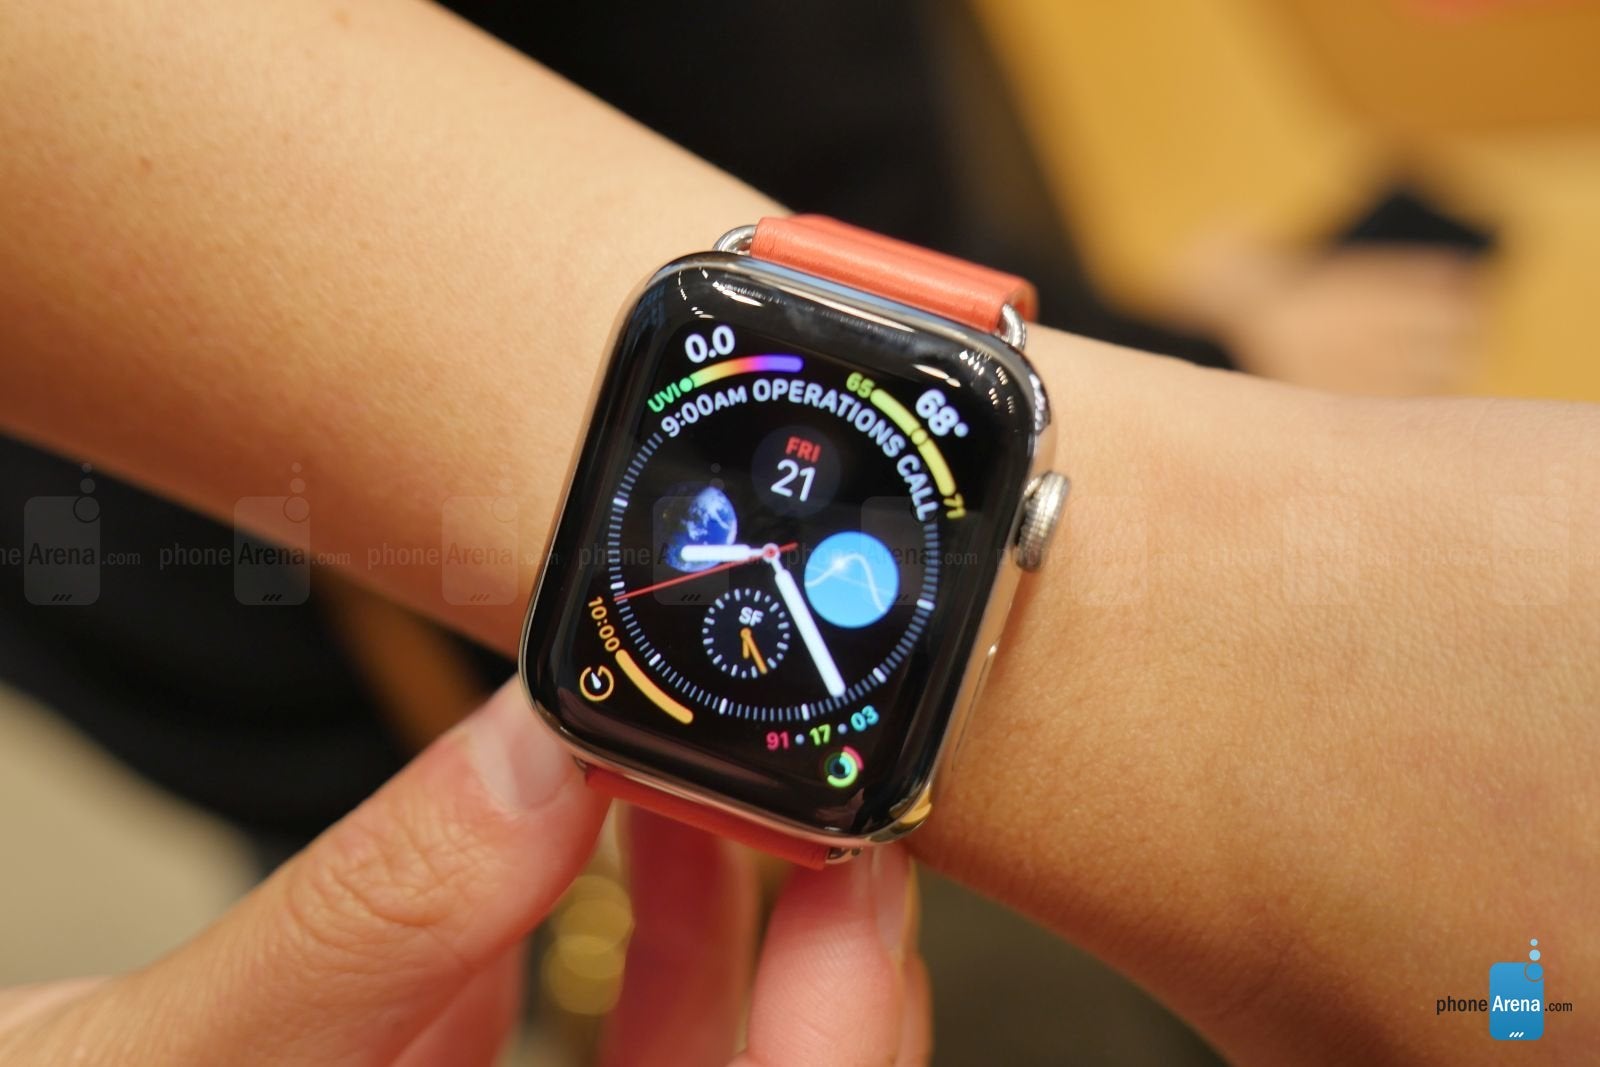 Apple Watch Series 4 hands-on: Small changes add up